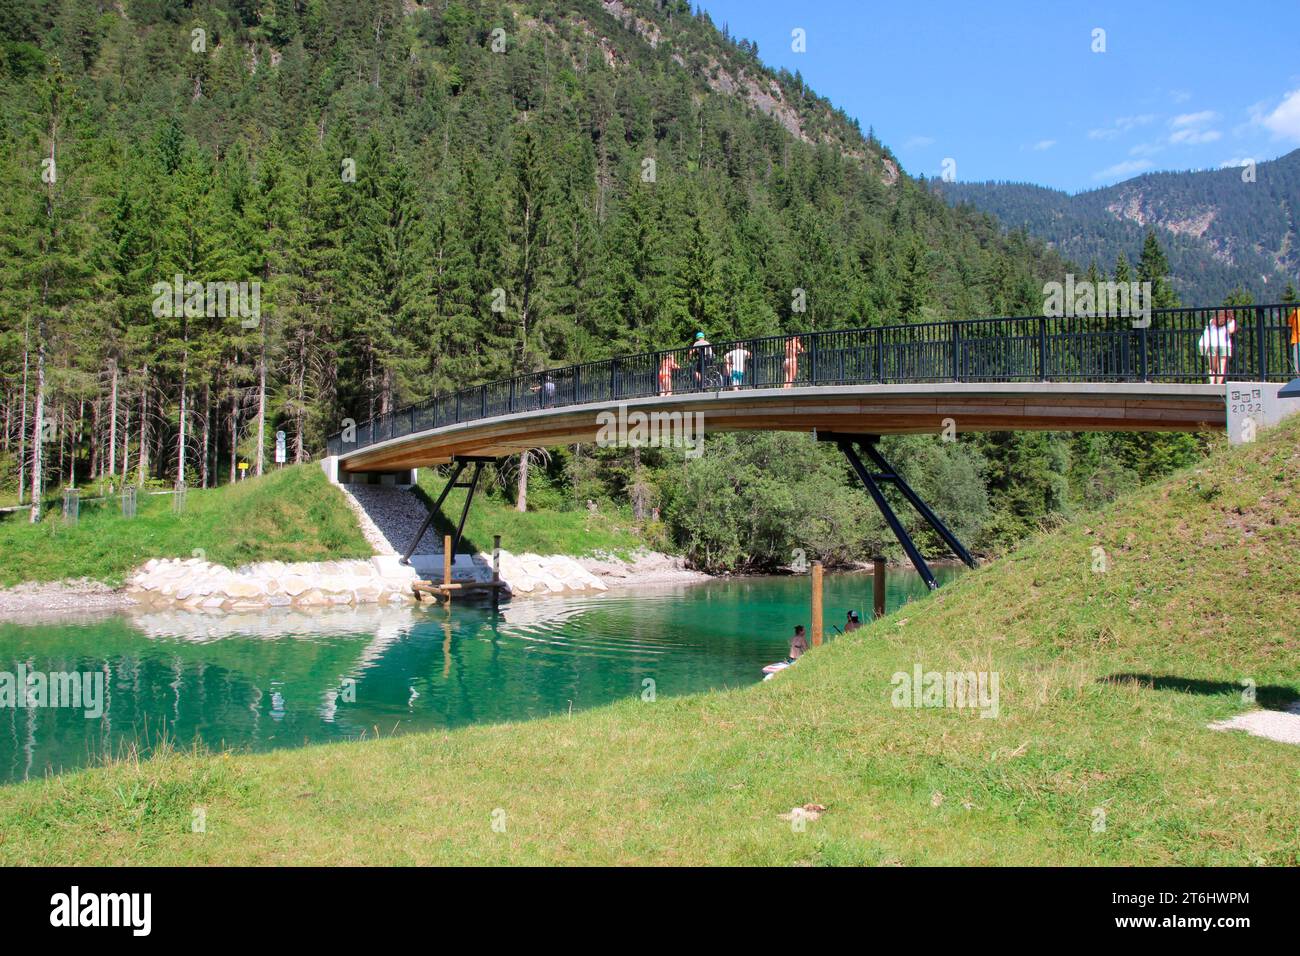 Newly built canal bridge bridging the water connection between Plansee and Heiterwanger See, Heiterwang, Tyrol, Austria. Stock Photo